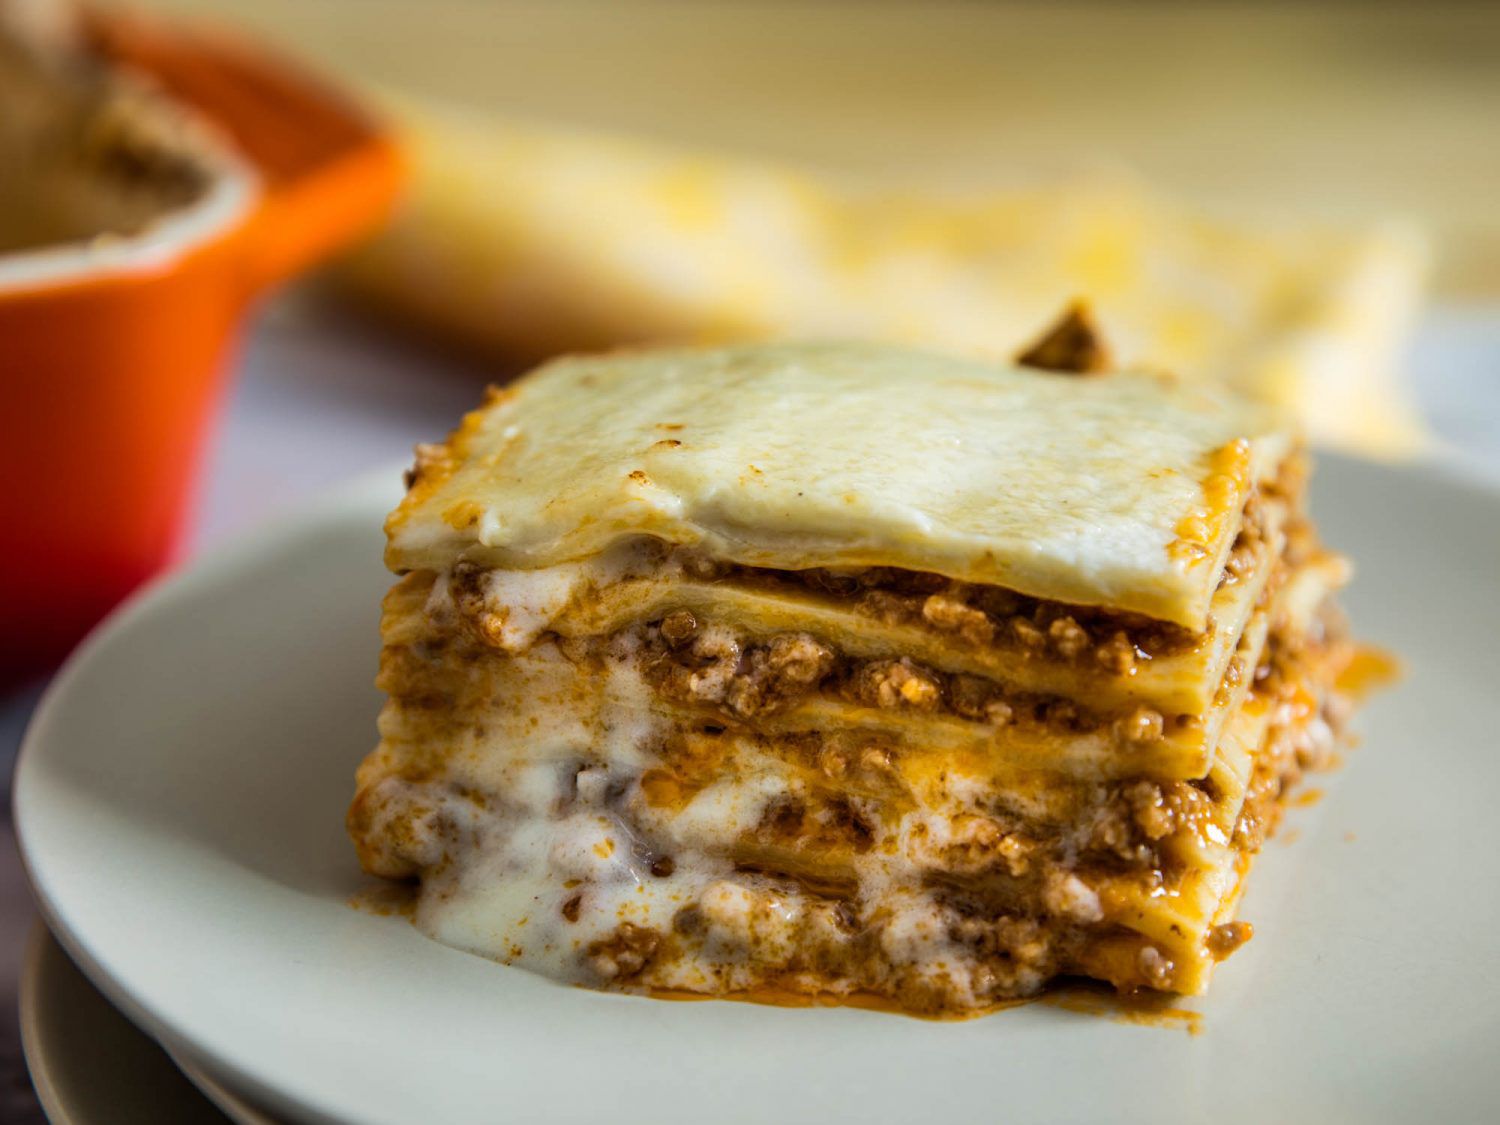 A healthy slice of lasagna Bolognese served on a white plate.